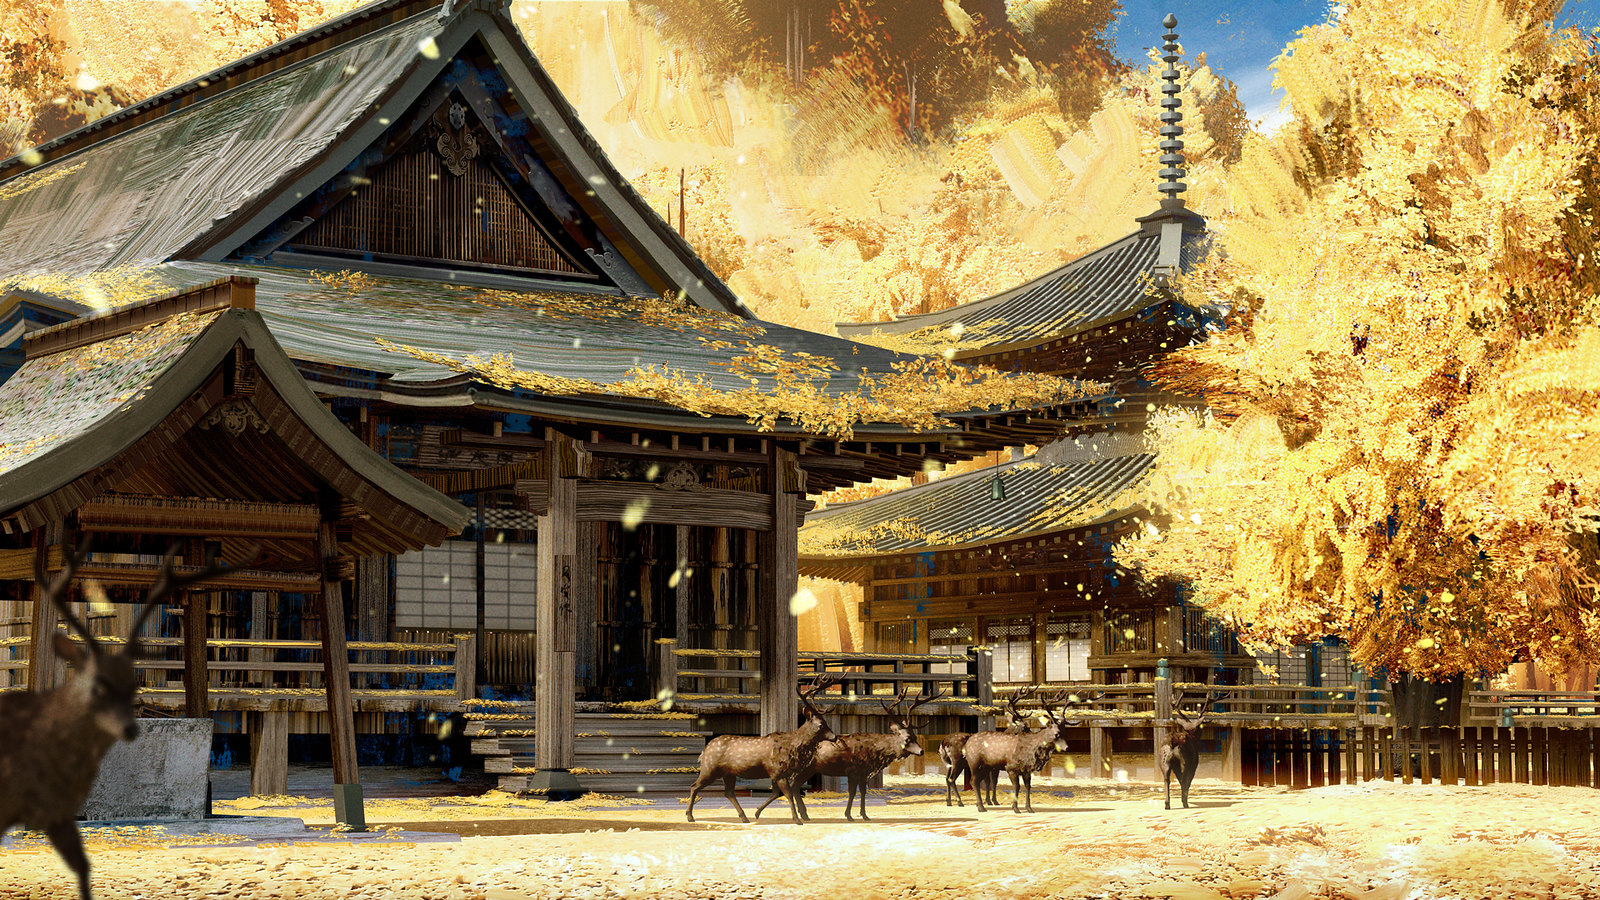 Video Conference Backgrounds - Ghost of Tsushima